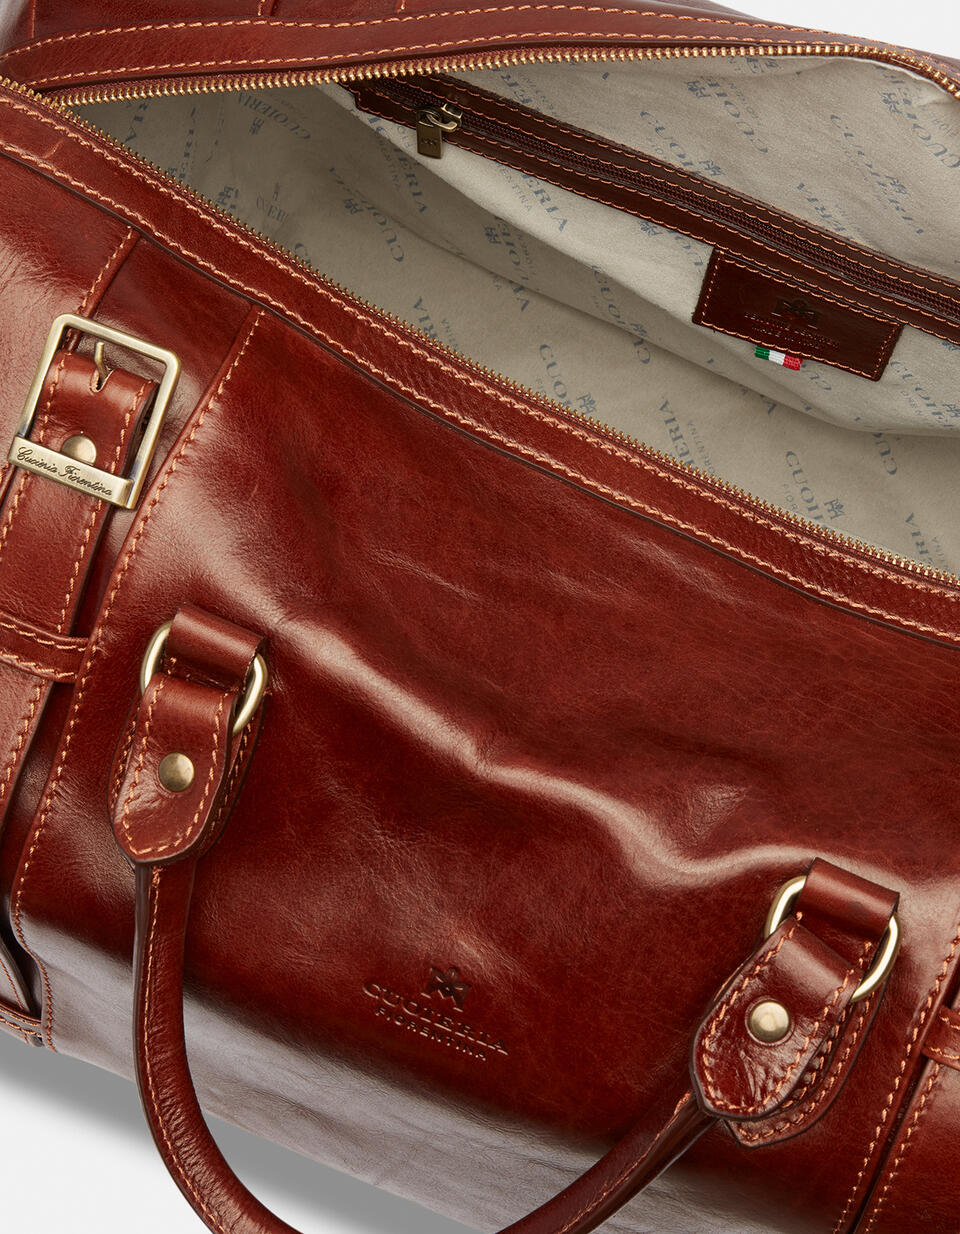 Leather travel bag with two handles - Luggage | TRAVEL BAGS  - Luggage | TRAVEL BAGSCuoieria Fiorentina